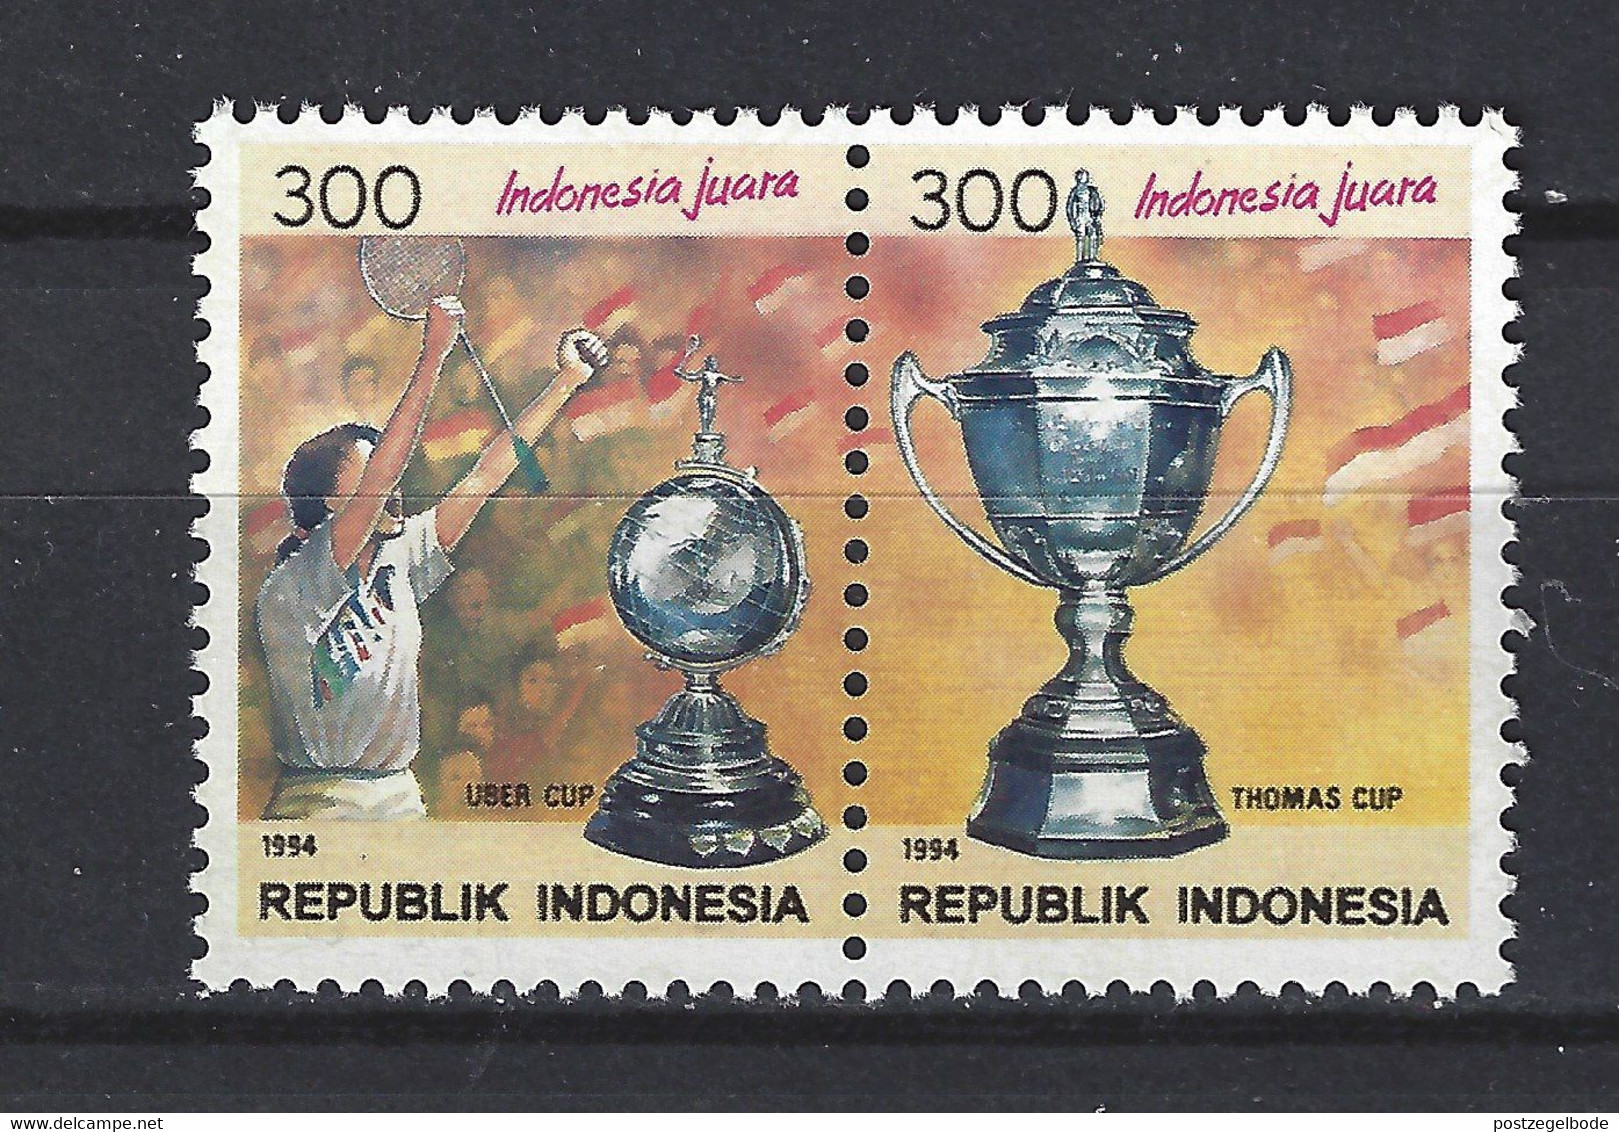 Indonesia Indonesie 1592-1593 MNH ; Badminton 1994 NOW MANY STAMPS INDONESIA VERY CHEAP - Badminton